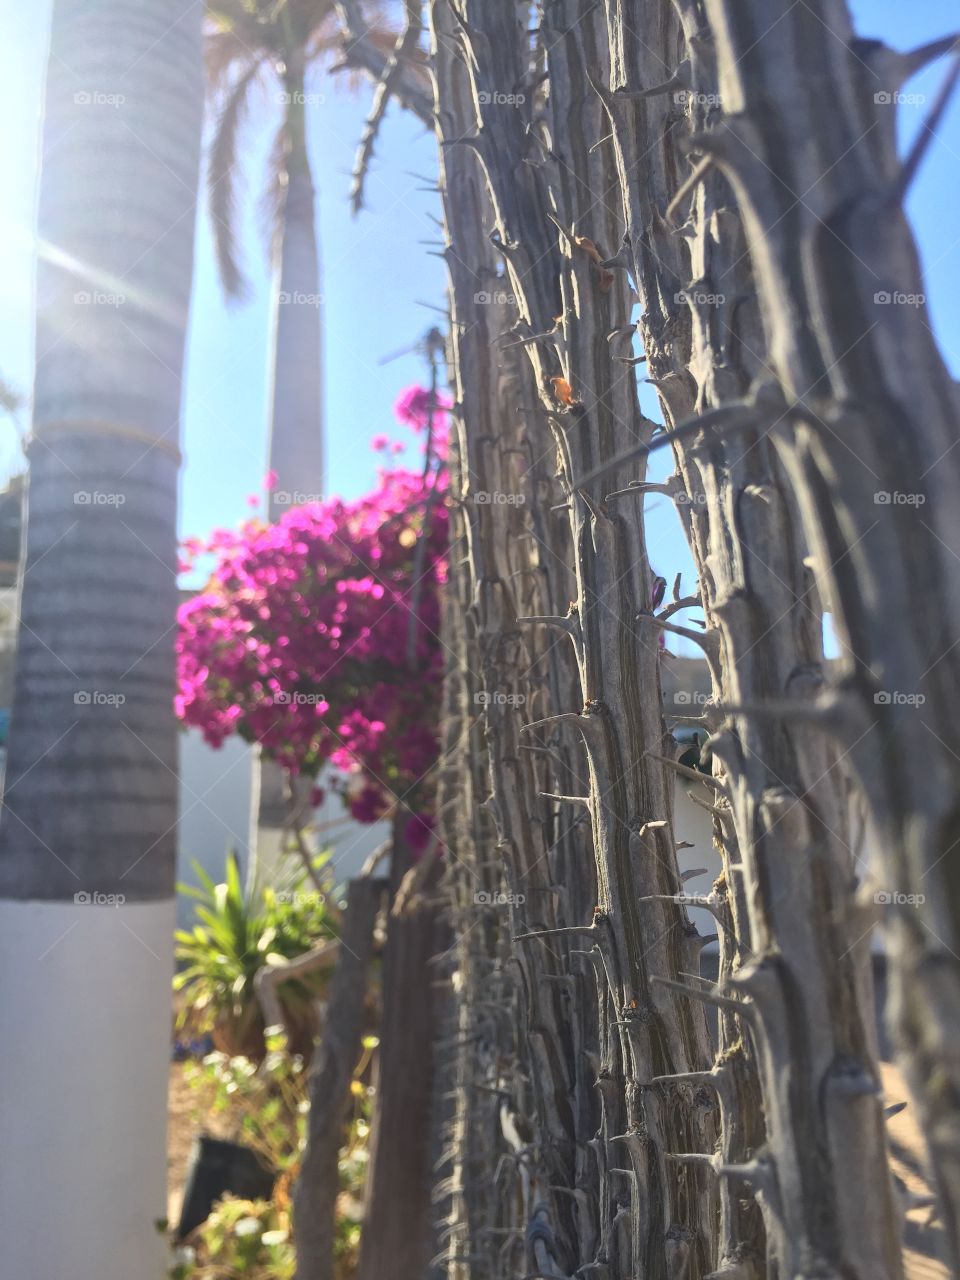 Fence in Mexico with flowers and cactus